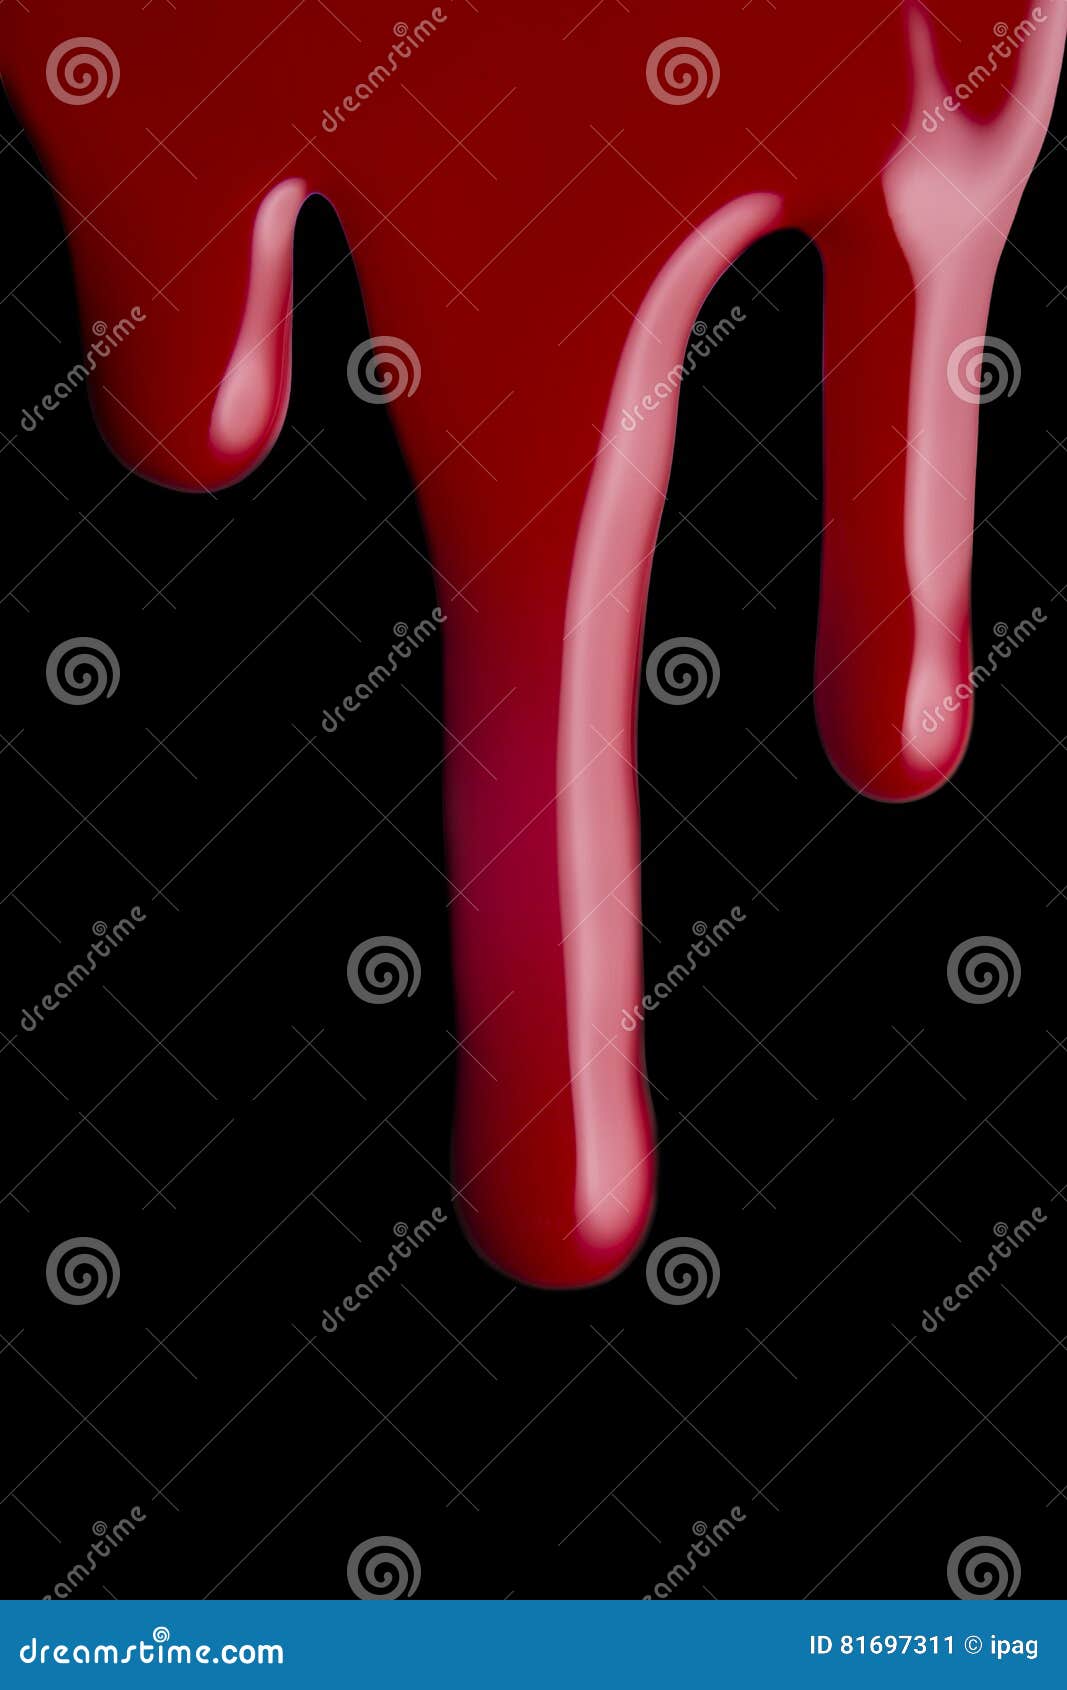 Shiny Red Nail Polish Spill Stock Image - Image of isolated, lacquer ...